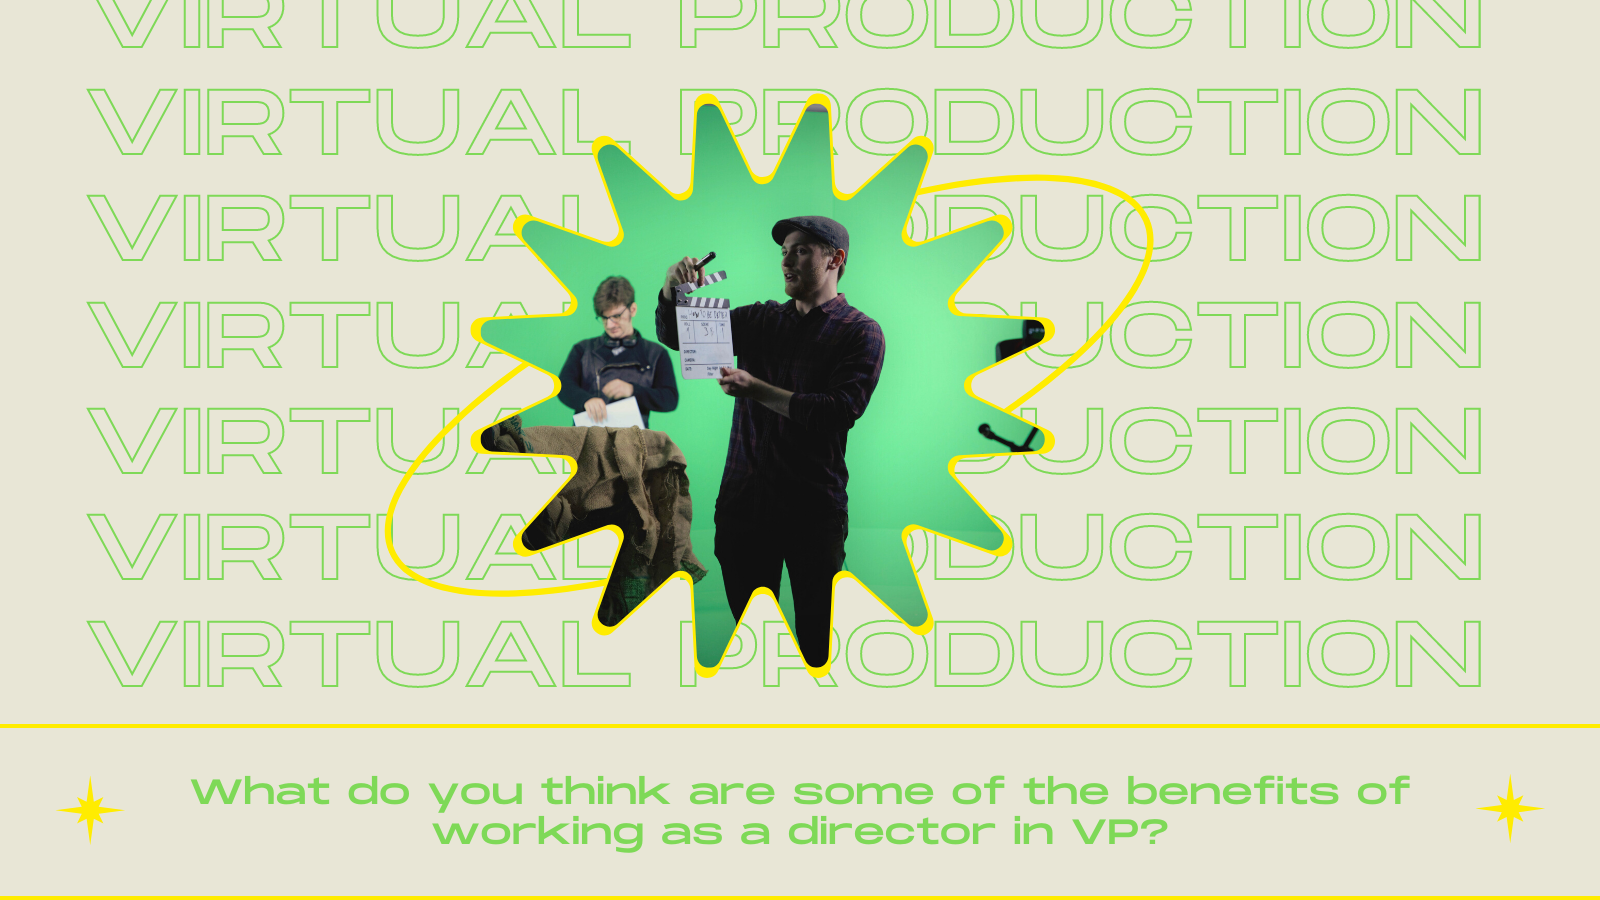 social media post asking for feedback on people's thoughts on directing Virtual Productions